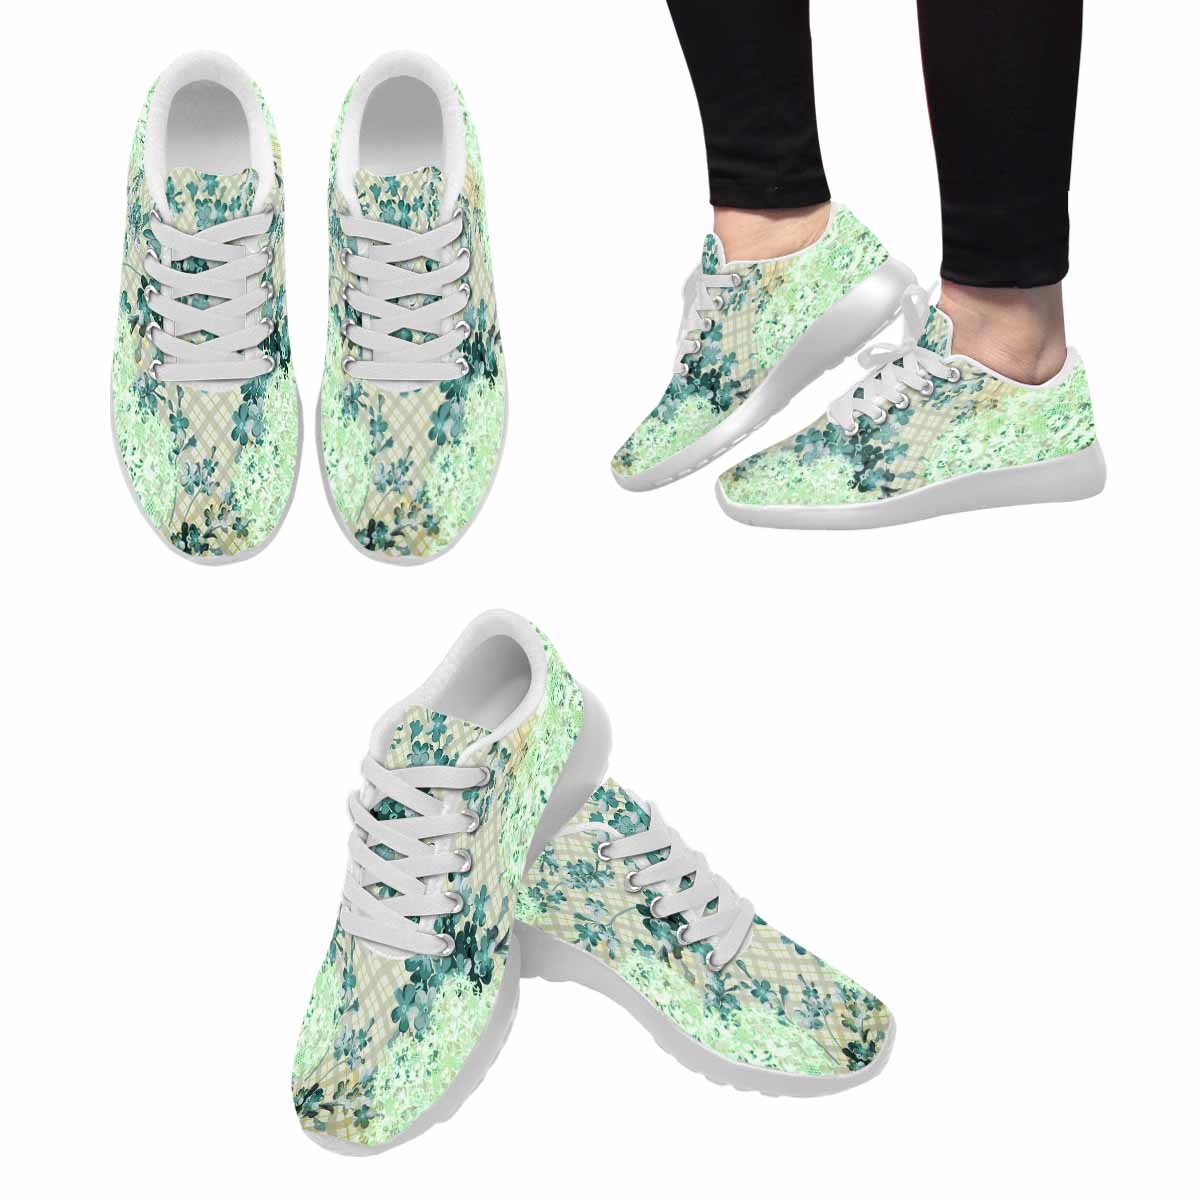 Victorian lace print, womens cute casual or running sneakers, design 53